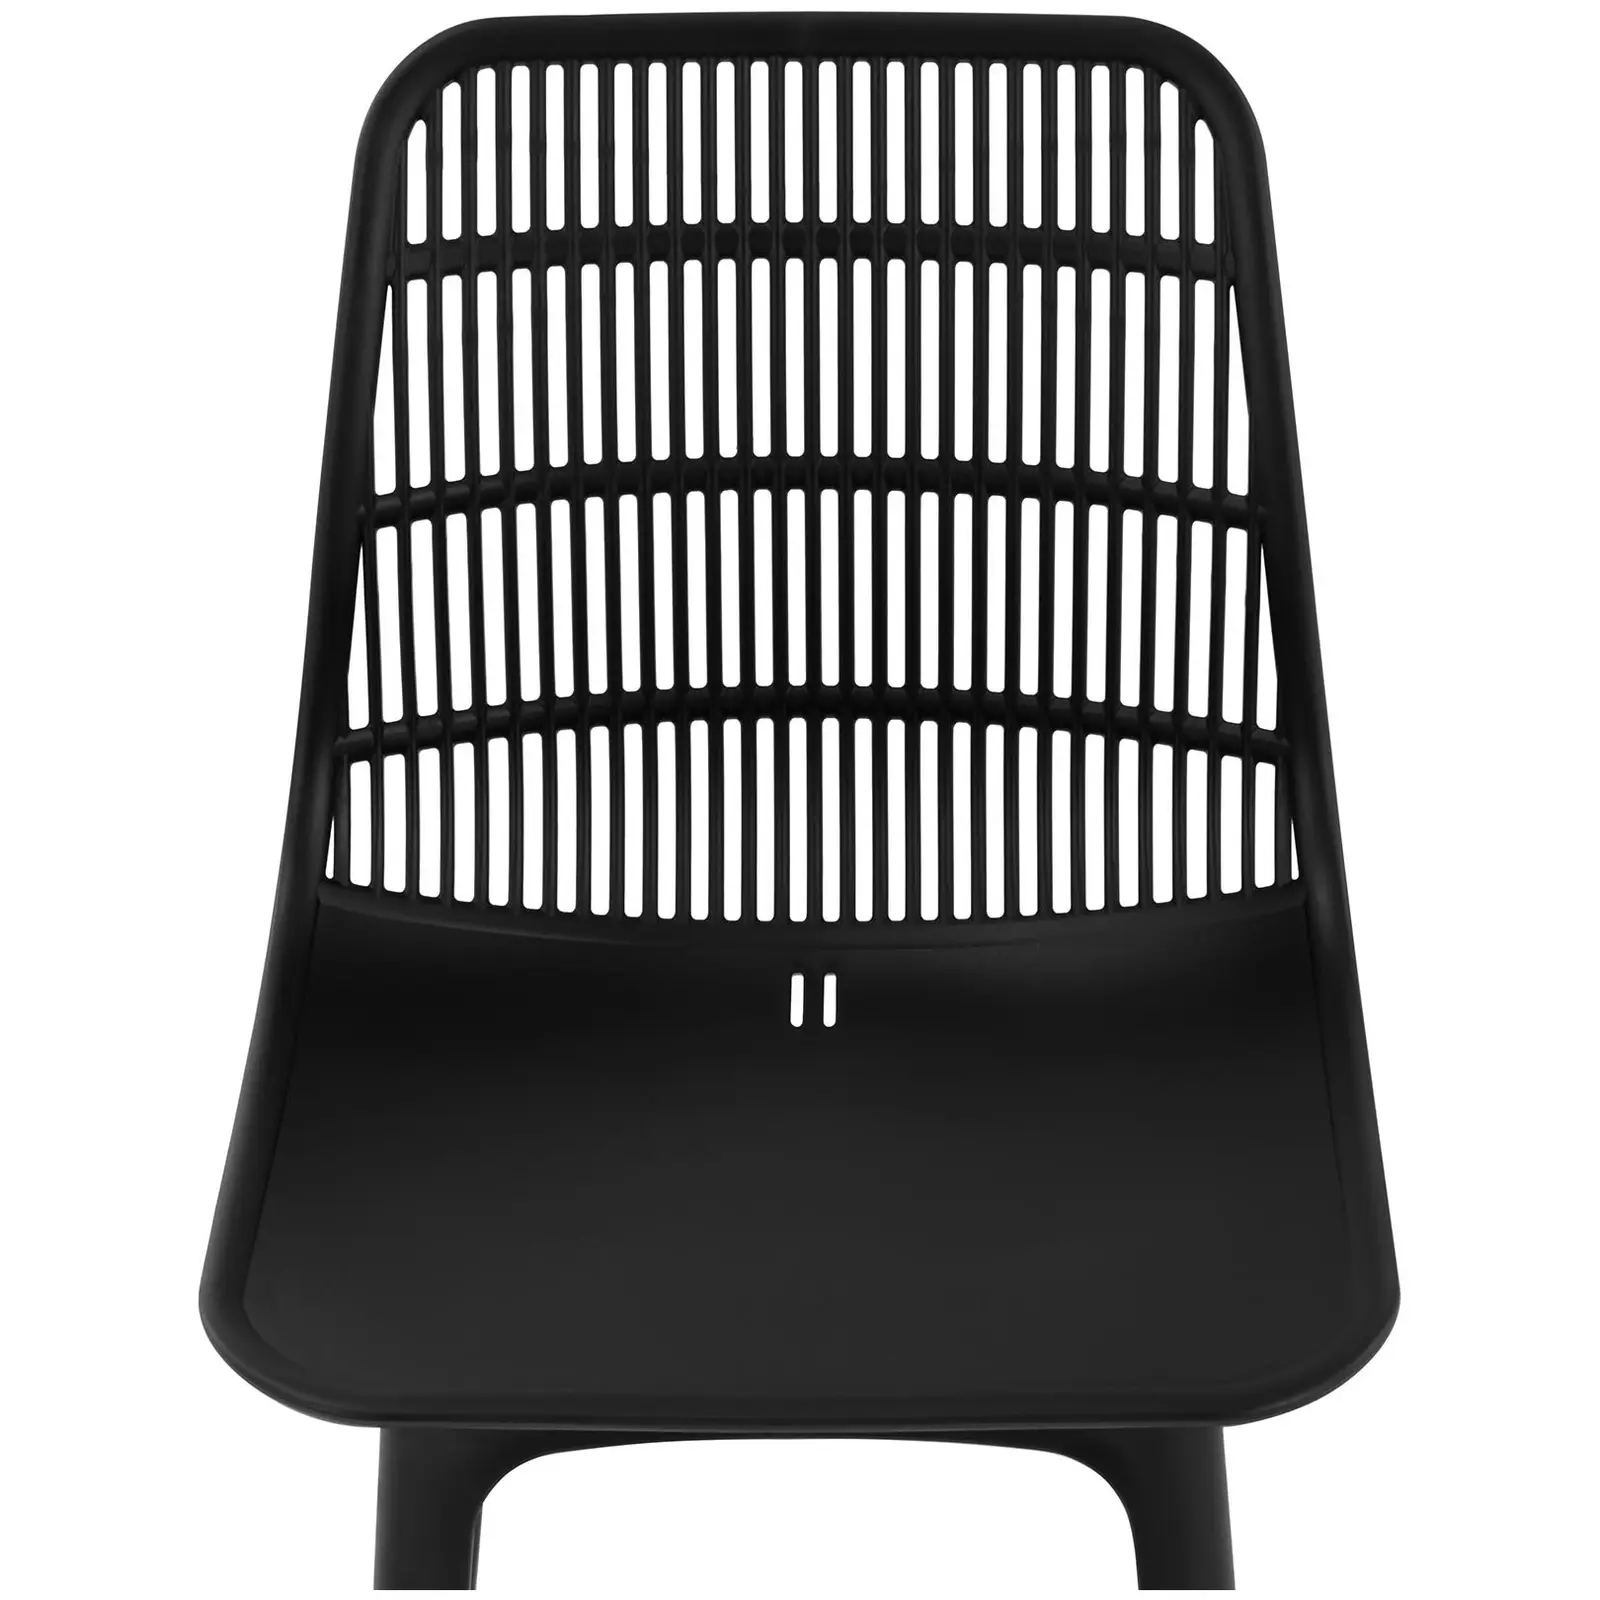 Chair - set of 2 - Royal Catering - up to 150 kg - backrest with air slits - black